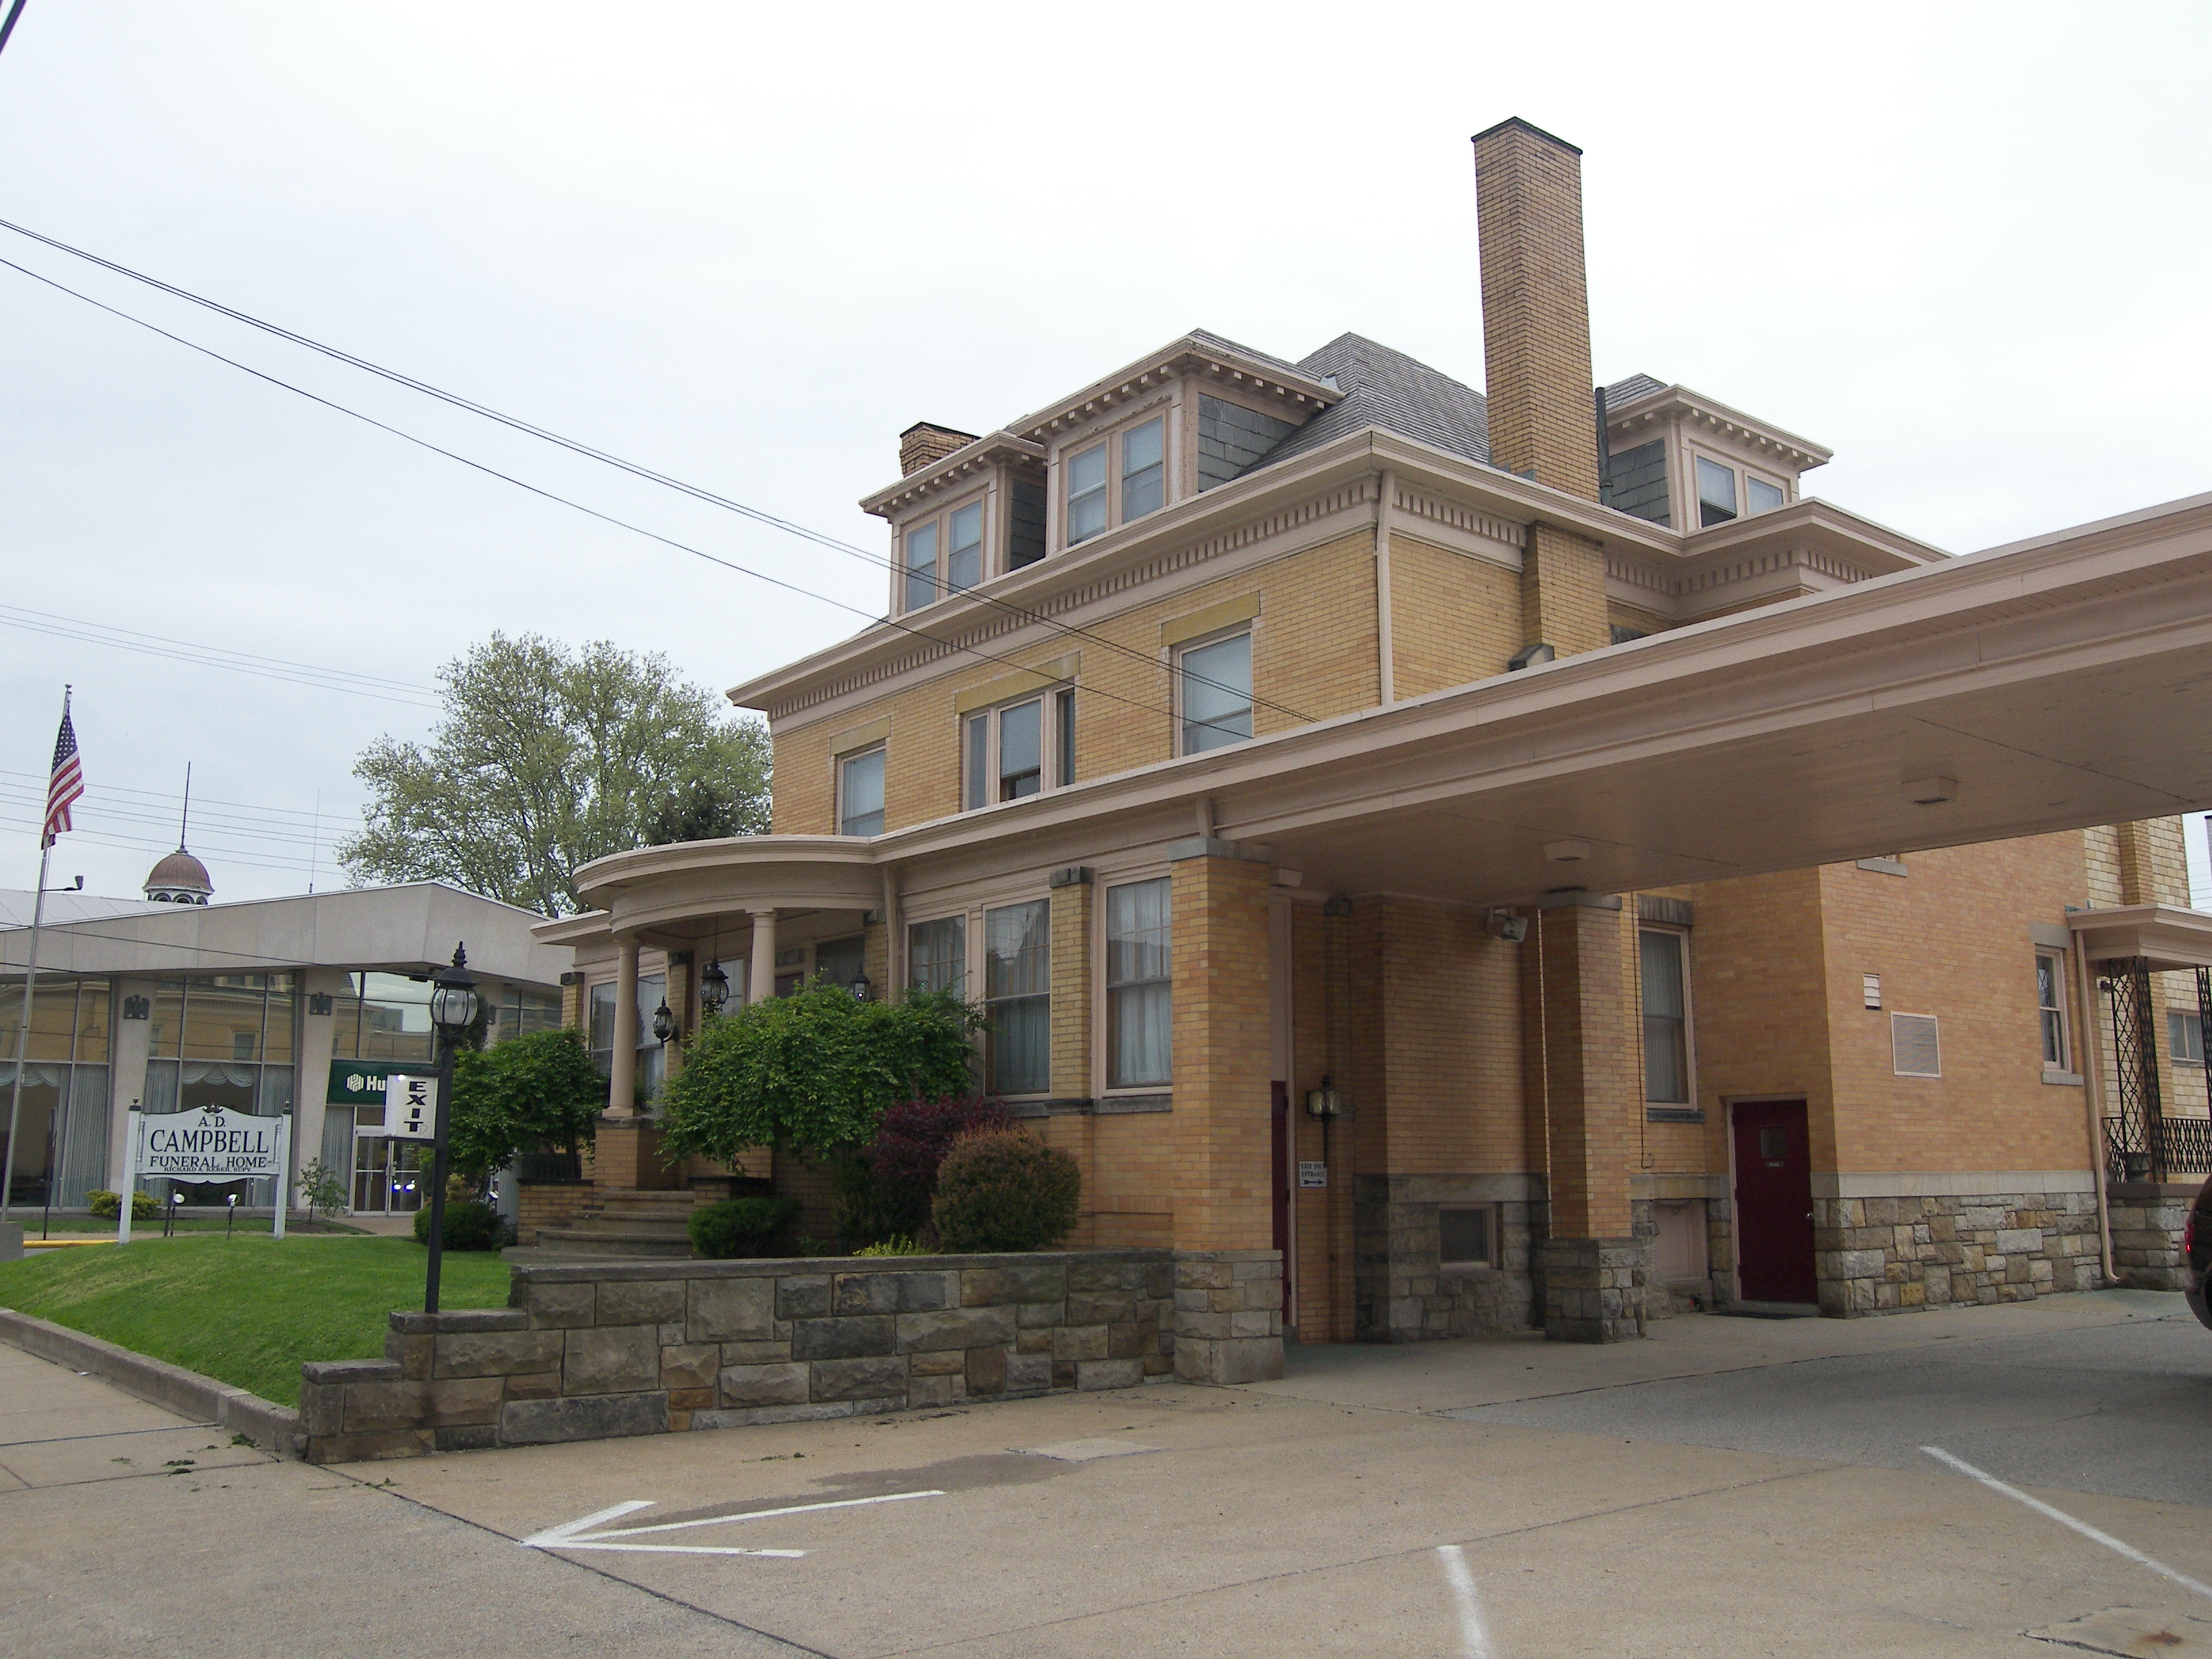 A.D. Campbell Funeral Home located in Beaver Falls PA